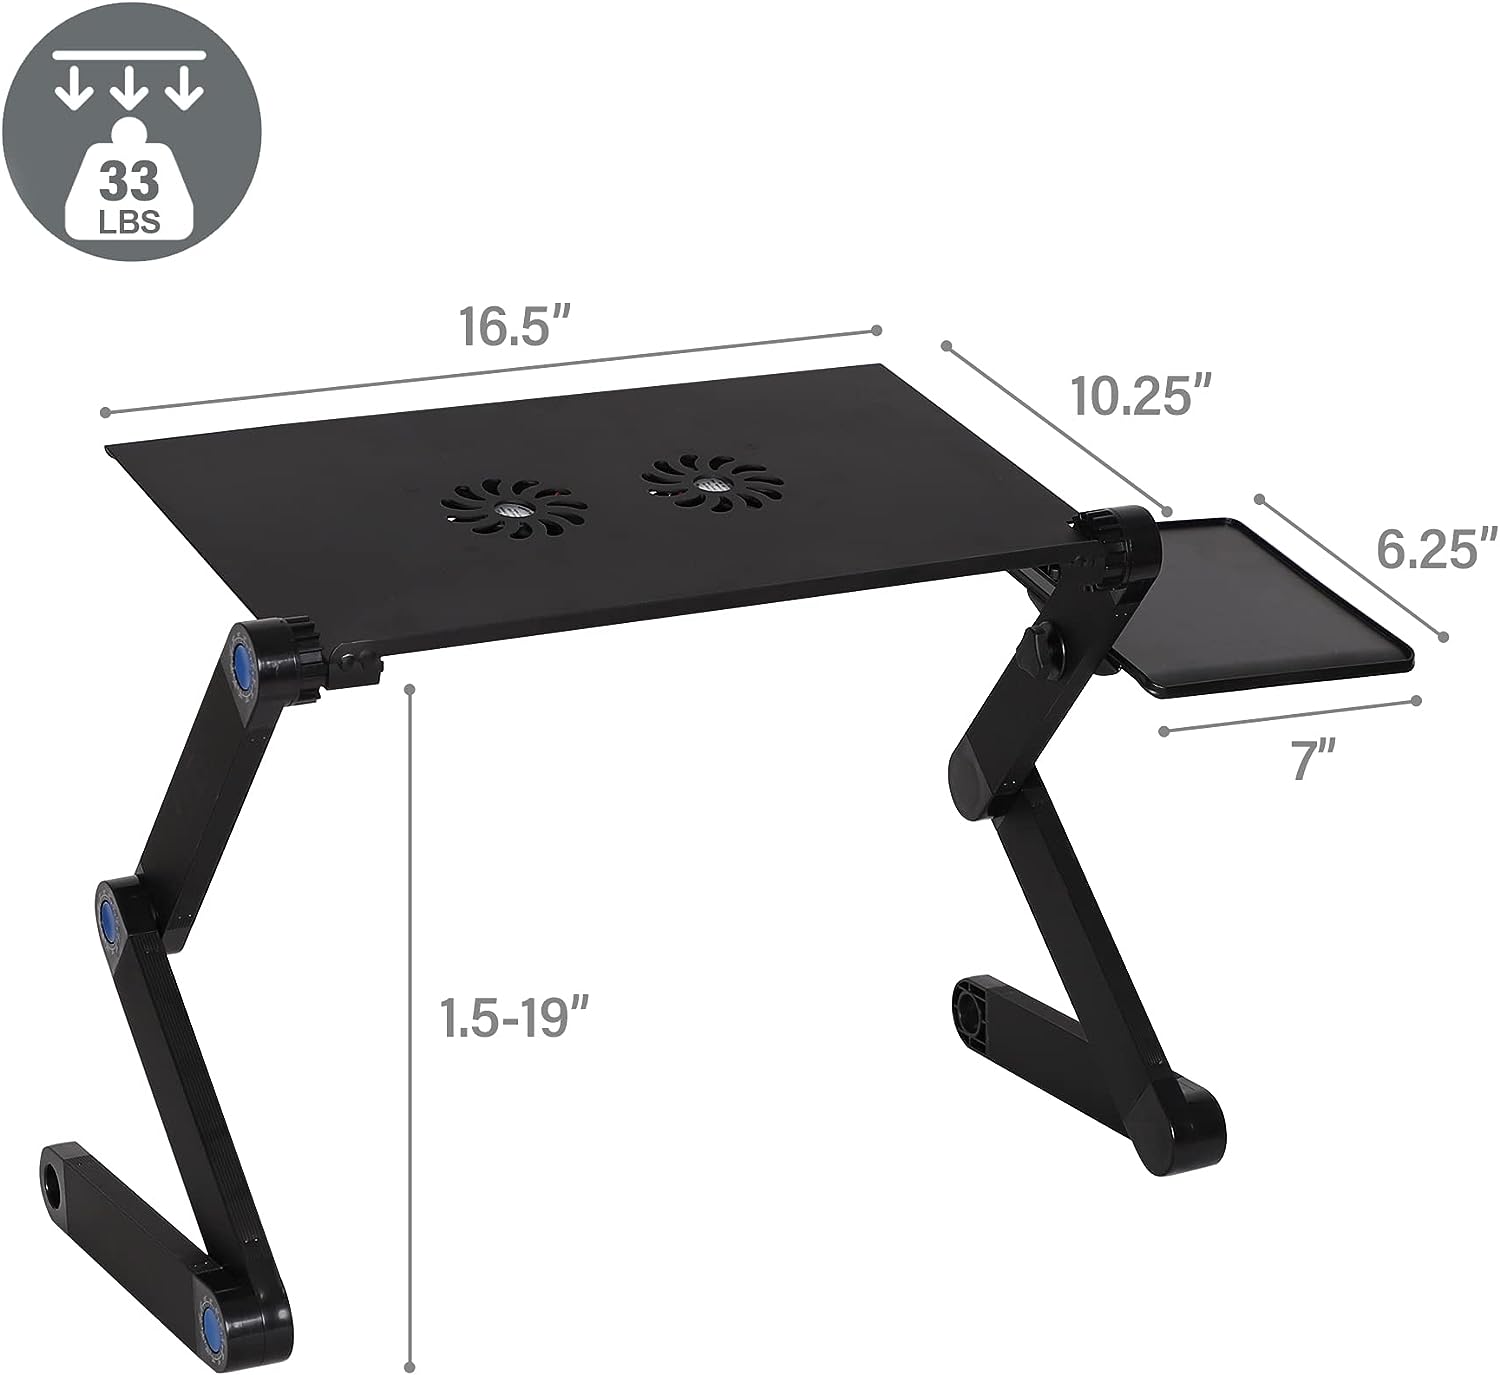 Adjustable Laptop Stand With 2 Cooling Fans and Detachable Mouse Pad Portable Folding Laptop Table Up to 17"